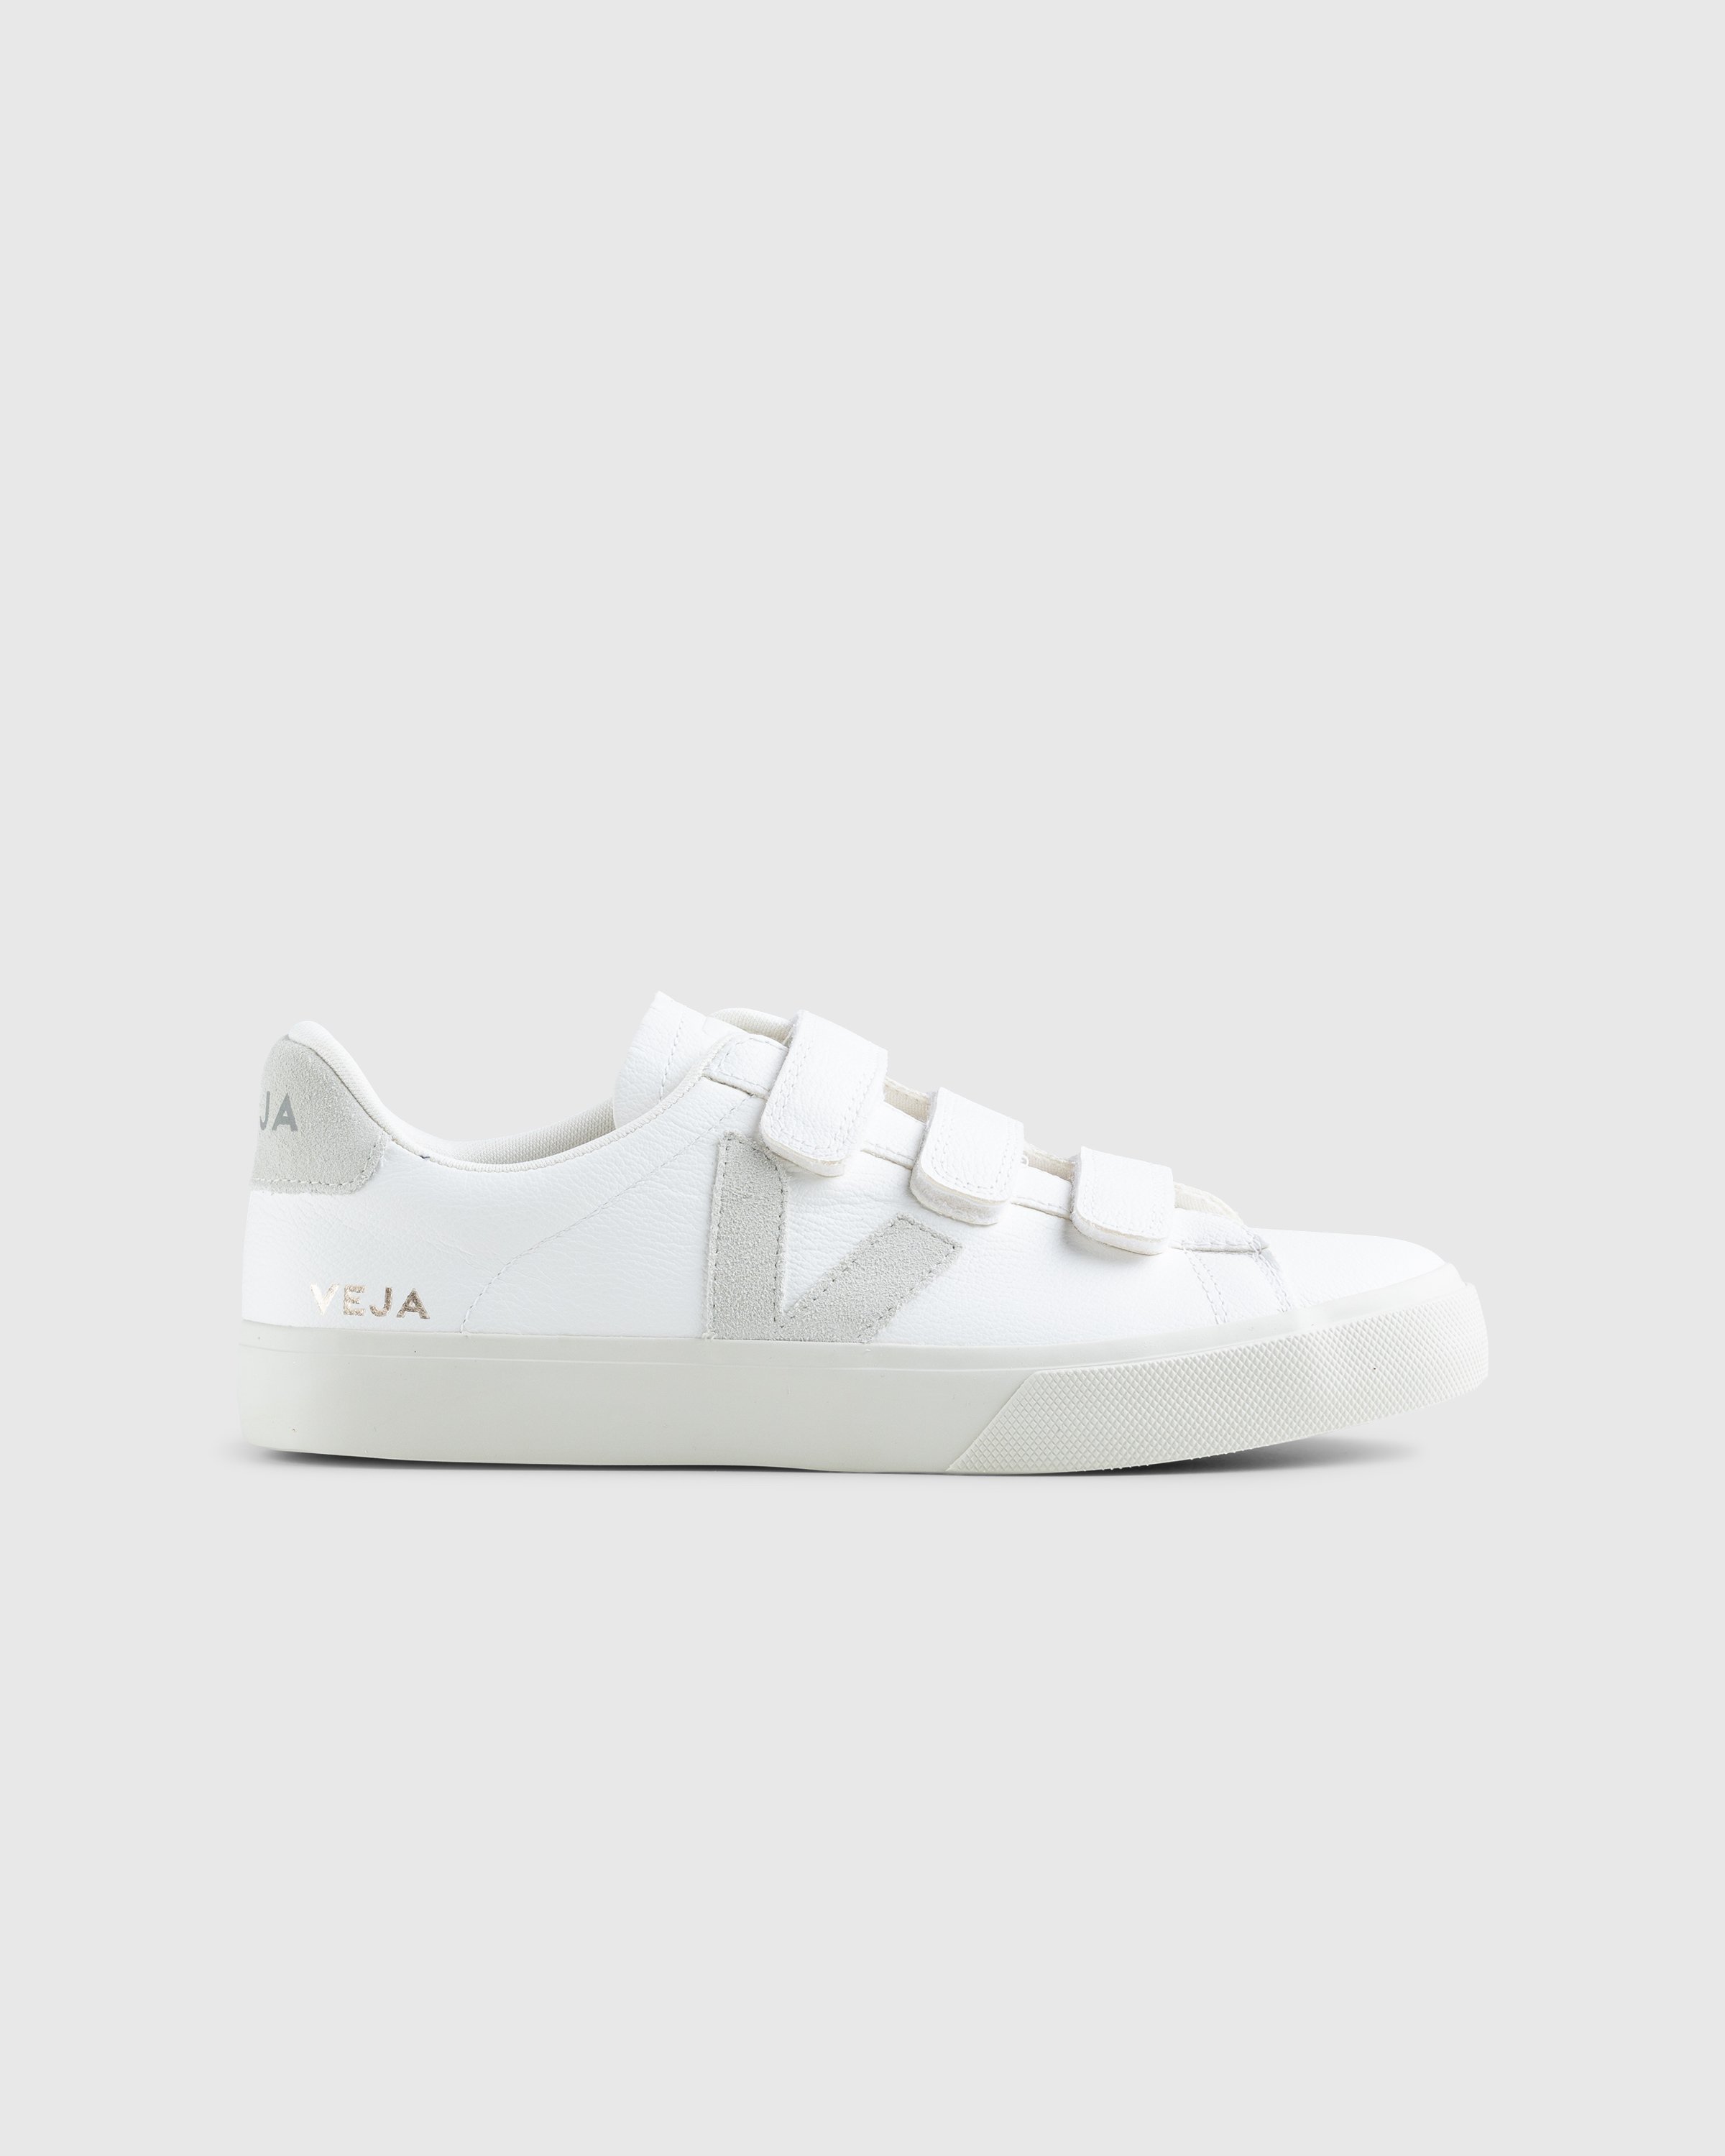 VEJA - Recife Chrome-Free Leather White/Natural - Footwear - White - Image 1